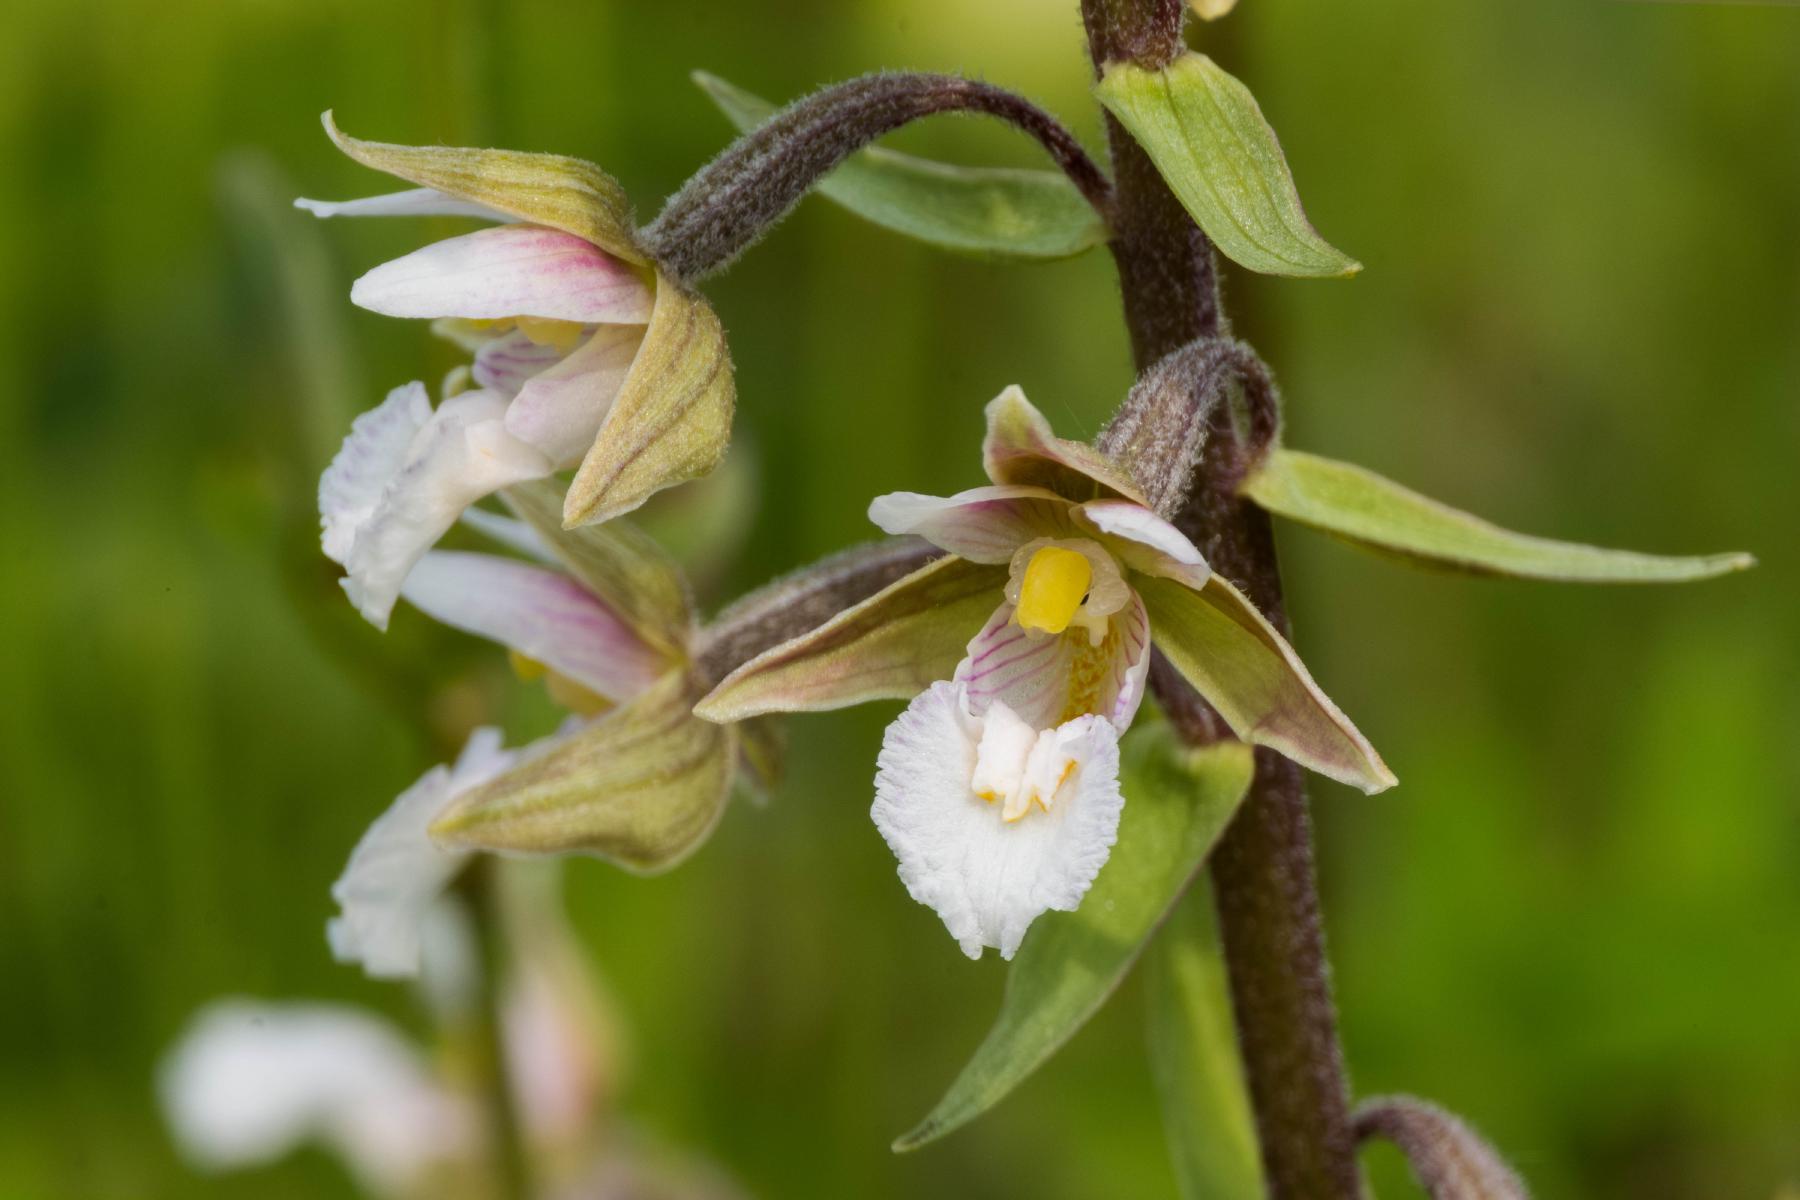 a close up of a marsh helleborine orchid flower, with a white tongue and dark purple sepals